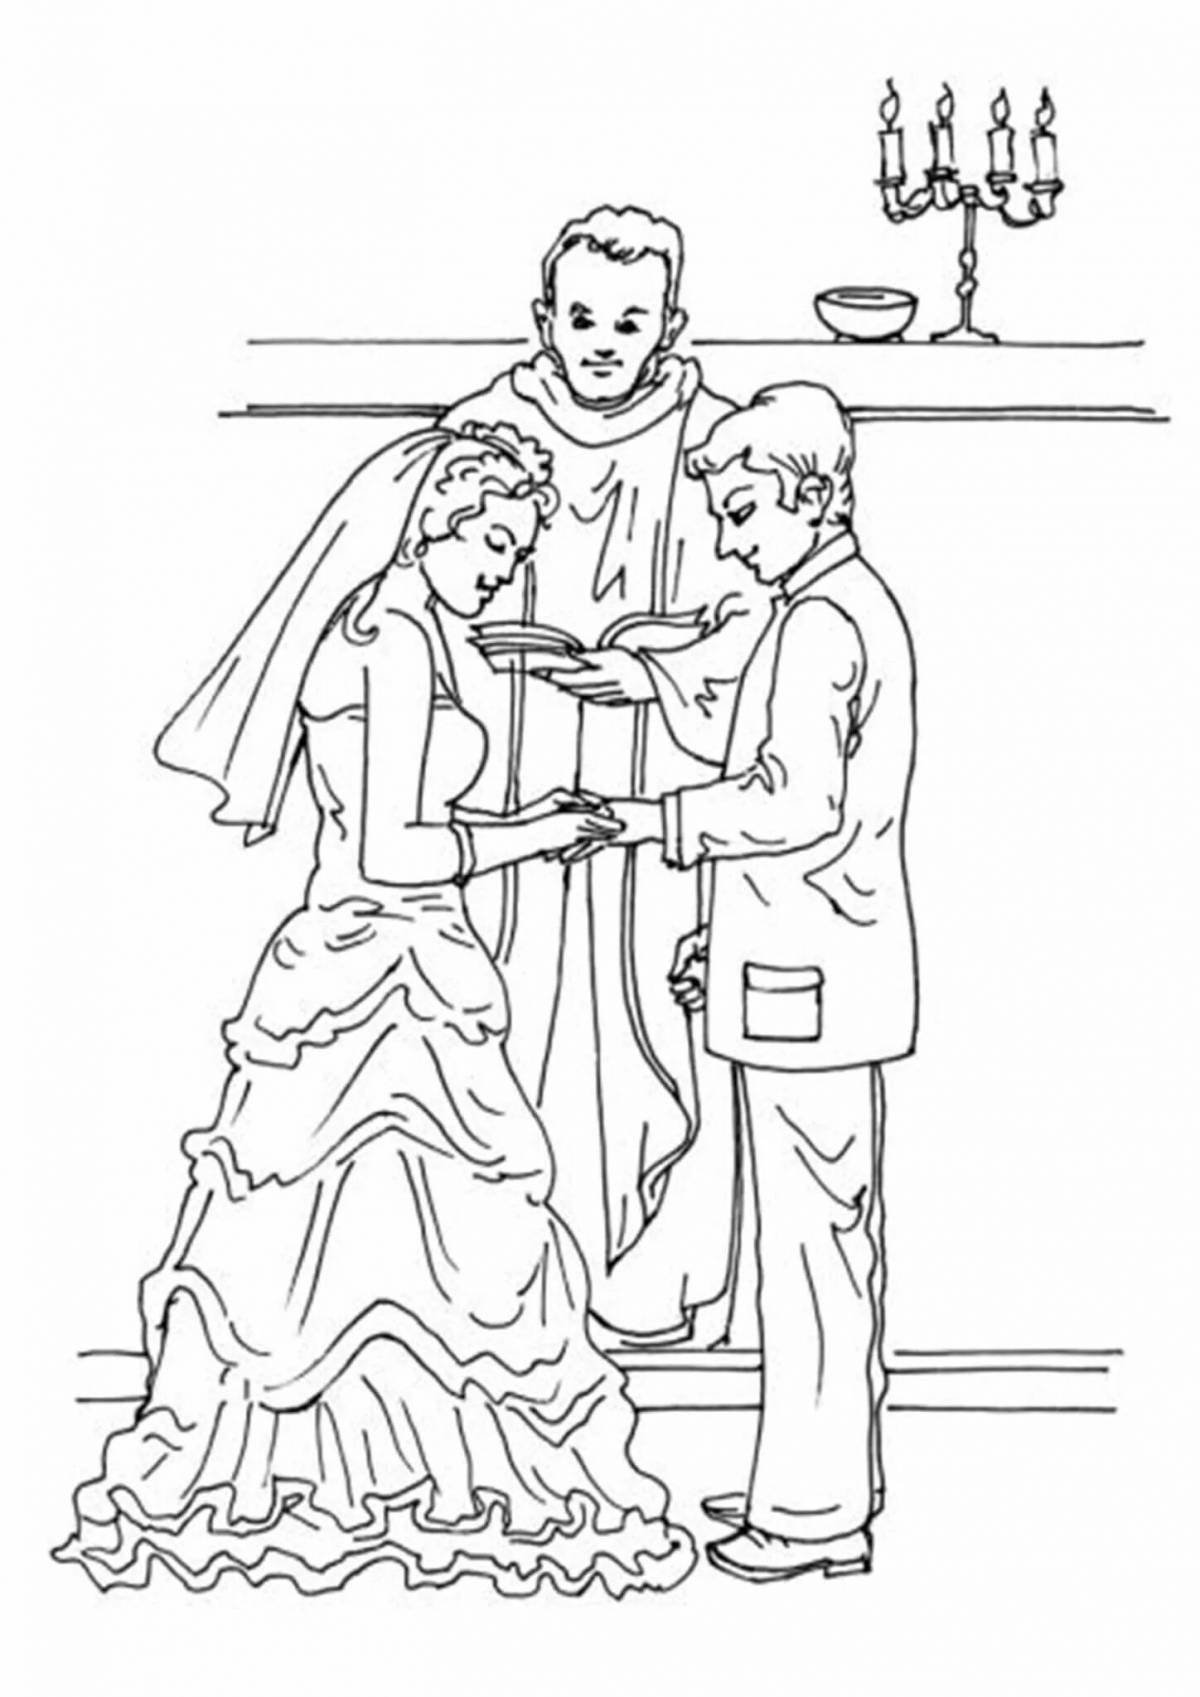 Glitter wedding coloring book for kids